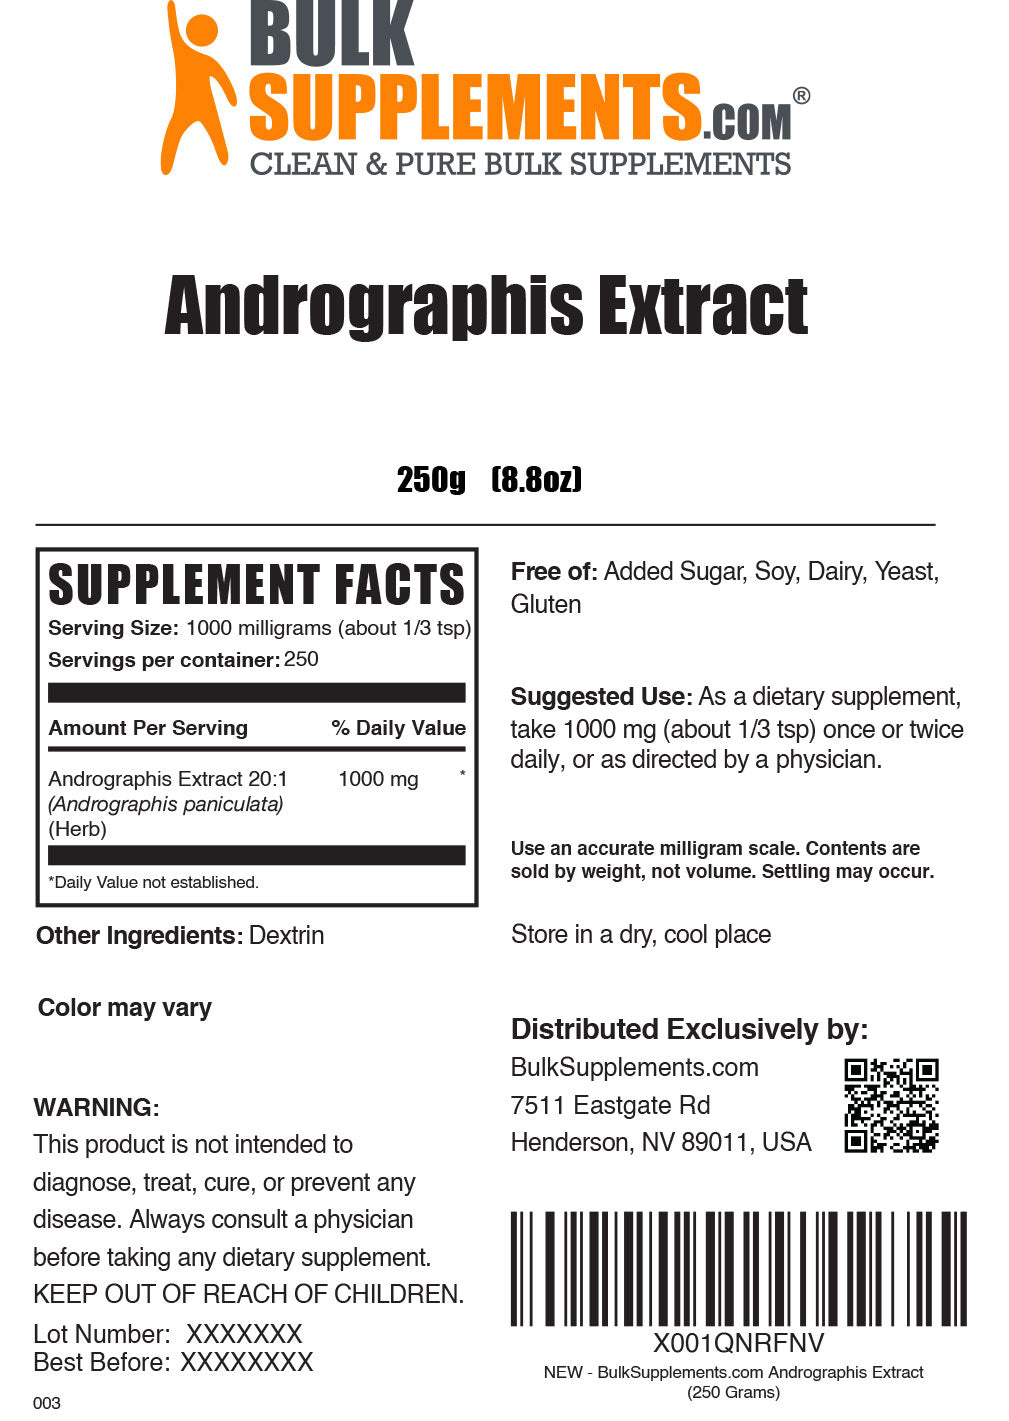 Andrographis Extract powder label 250g